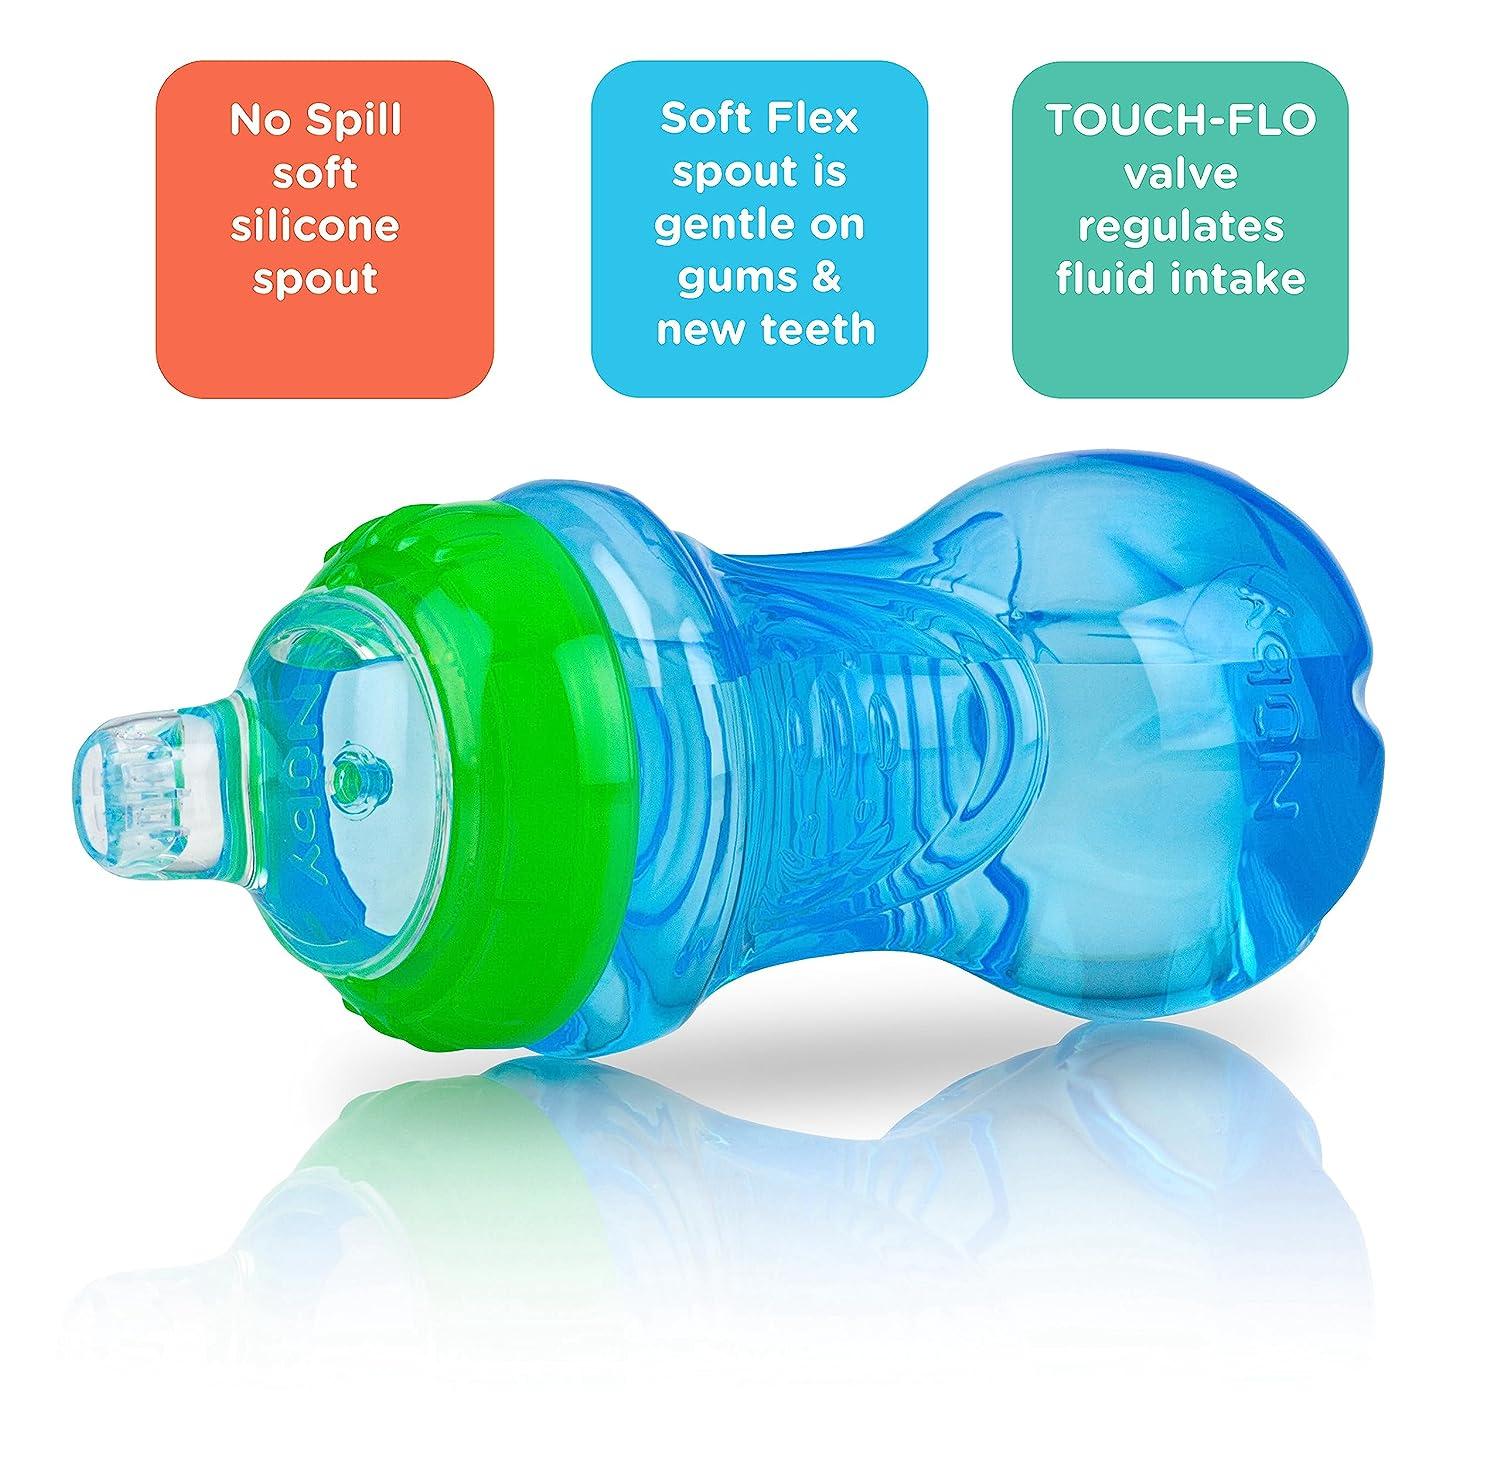 24 Bulk Nuby NO-Spill Easy Grip Cup, 10 Oz (blue/red 2-Pk) - at 